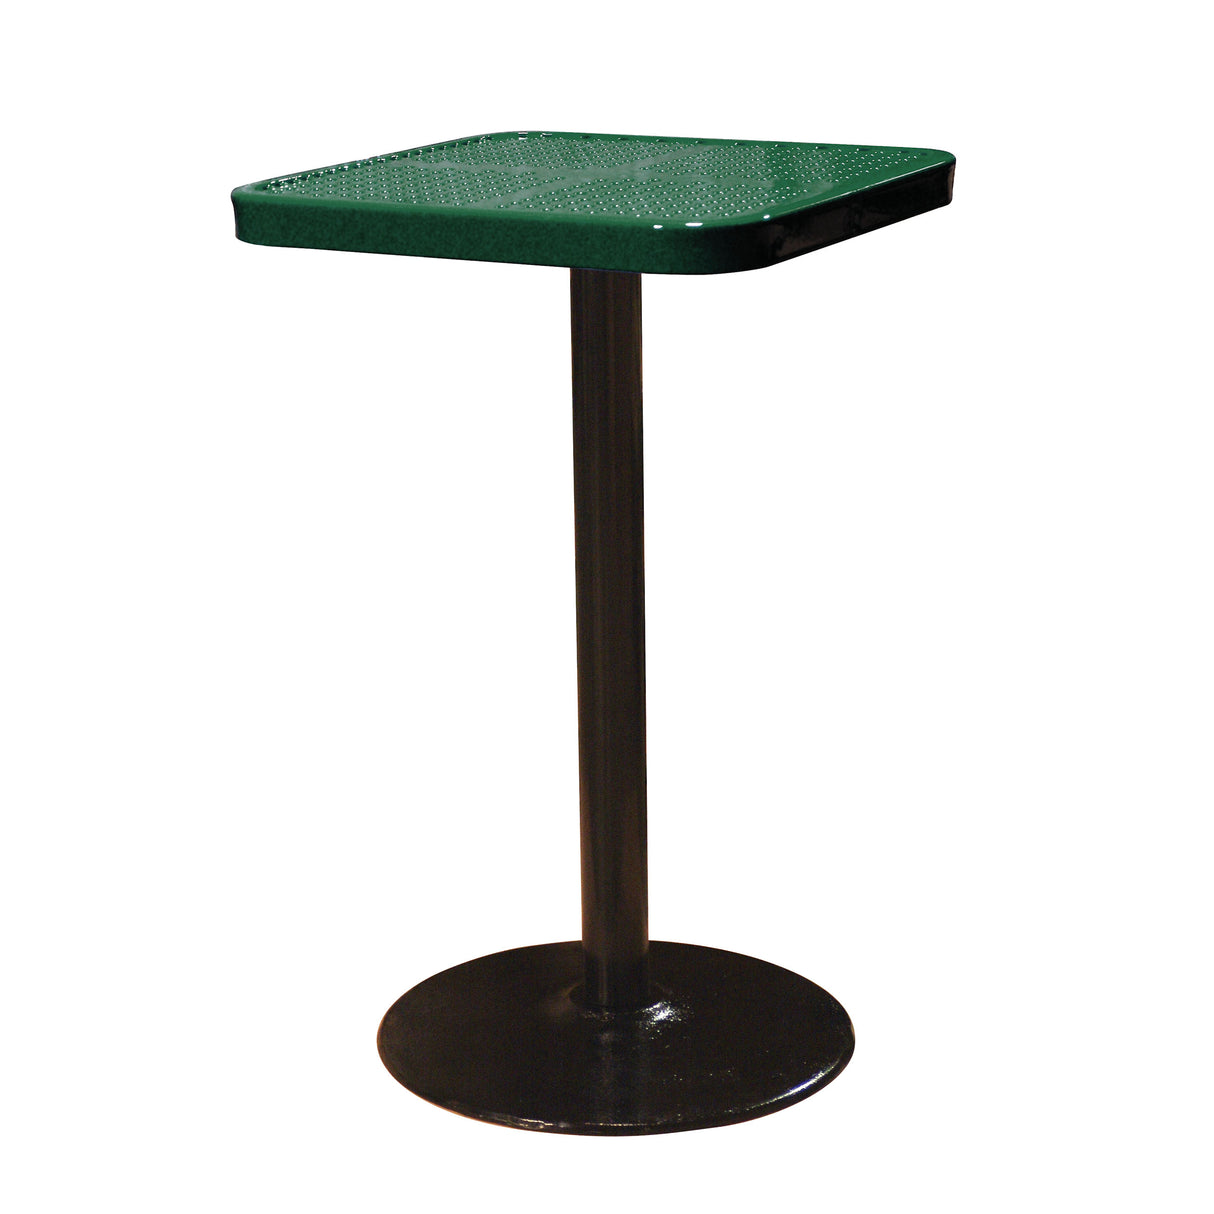 24˝ Square Perforated Pedestal Table